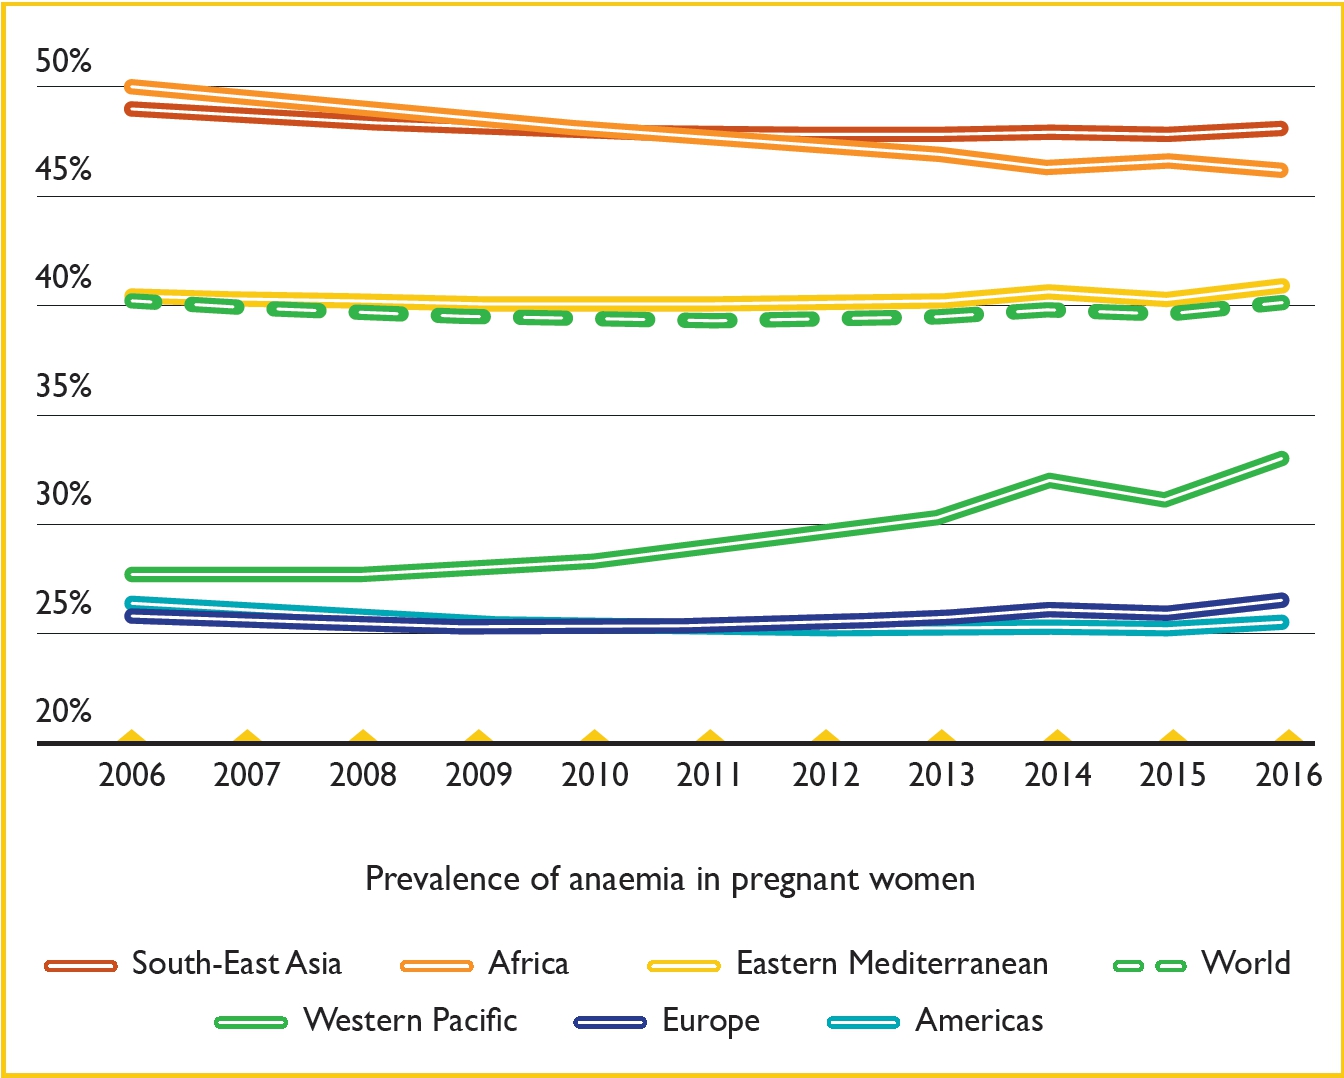 Prevalance of anaemia in pregnant women aged 15-49 by WHO region, defined as the percentage of women with a haemoglobin concentration of less than 110 grams per litre for pregnant women.